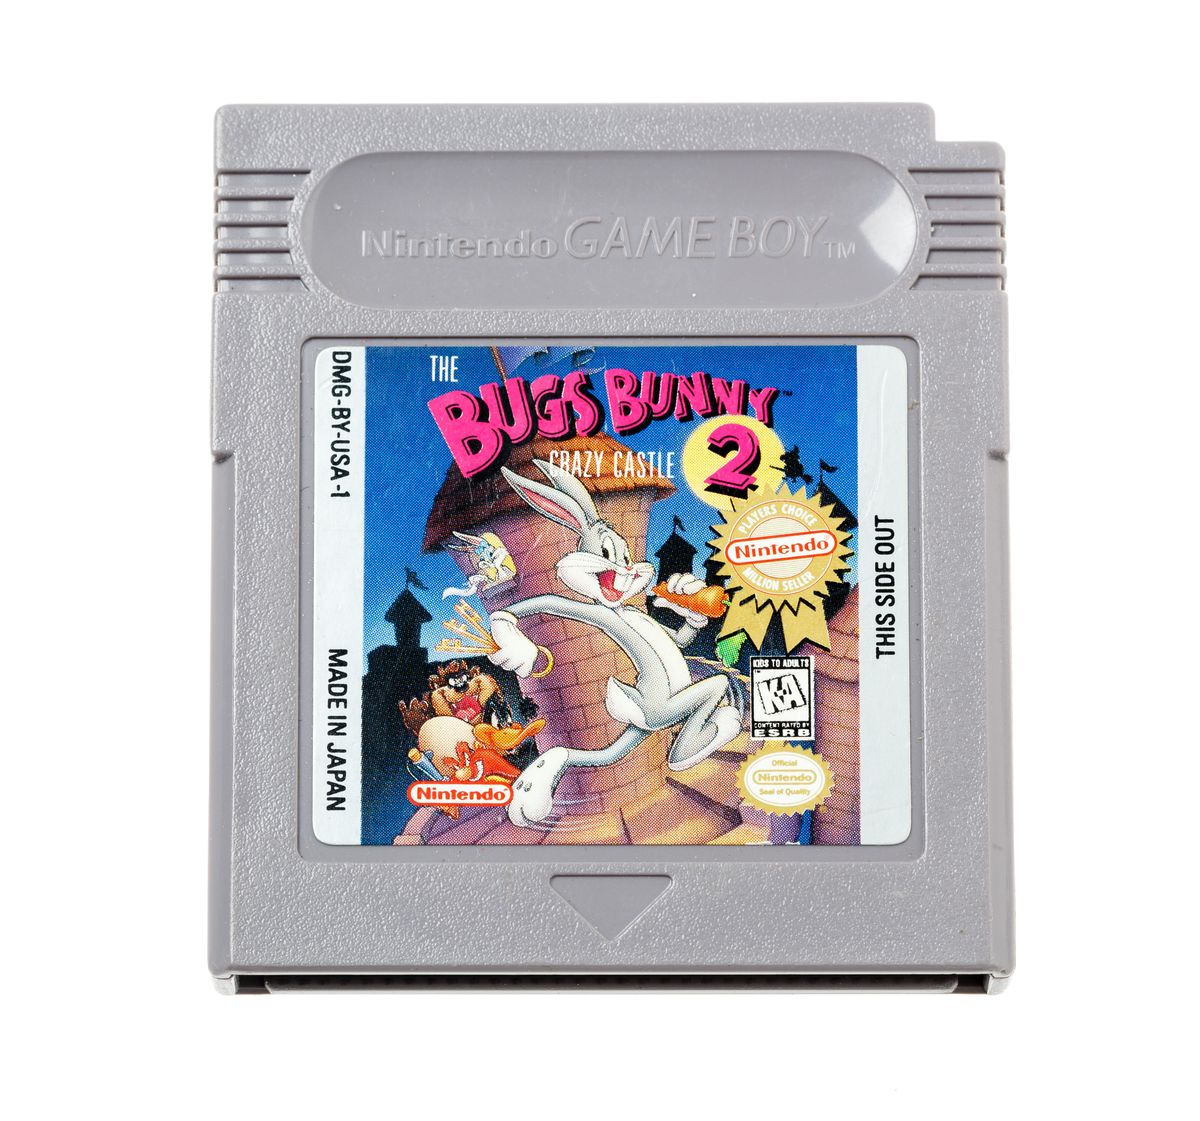 The Bugs Bunny Crazy Castle 2 - Gameboy Classic Games